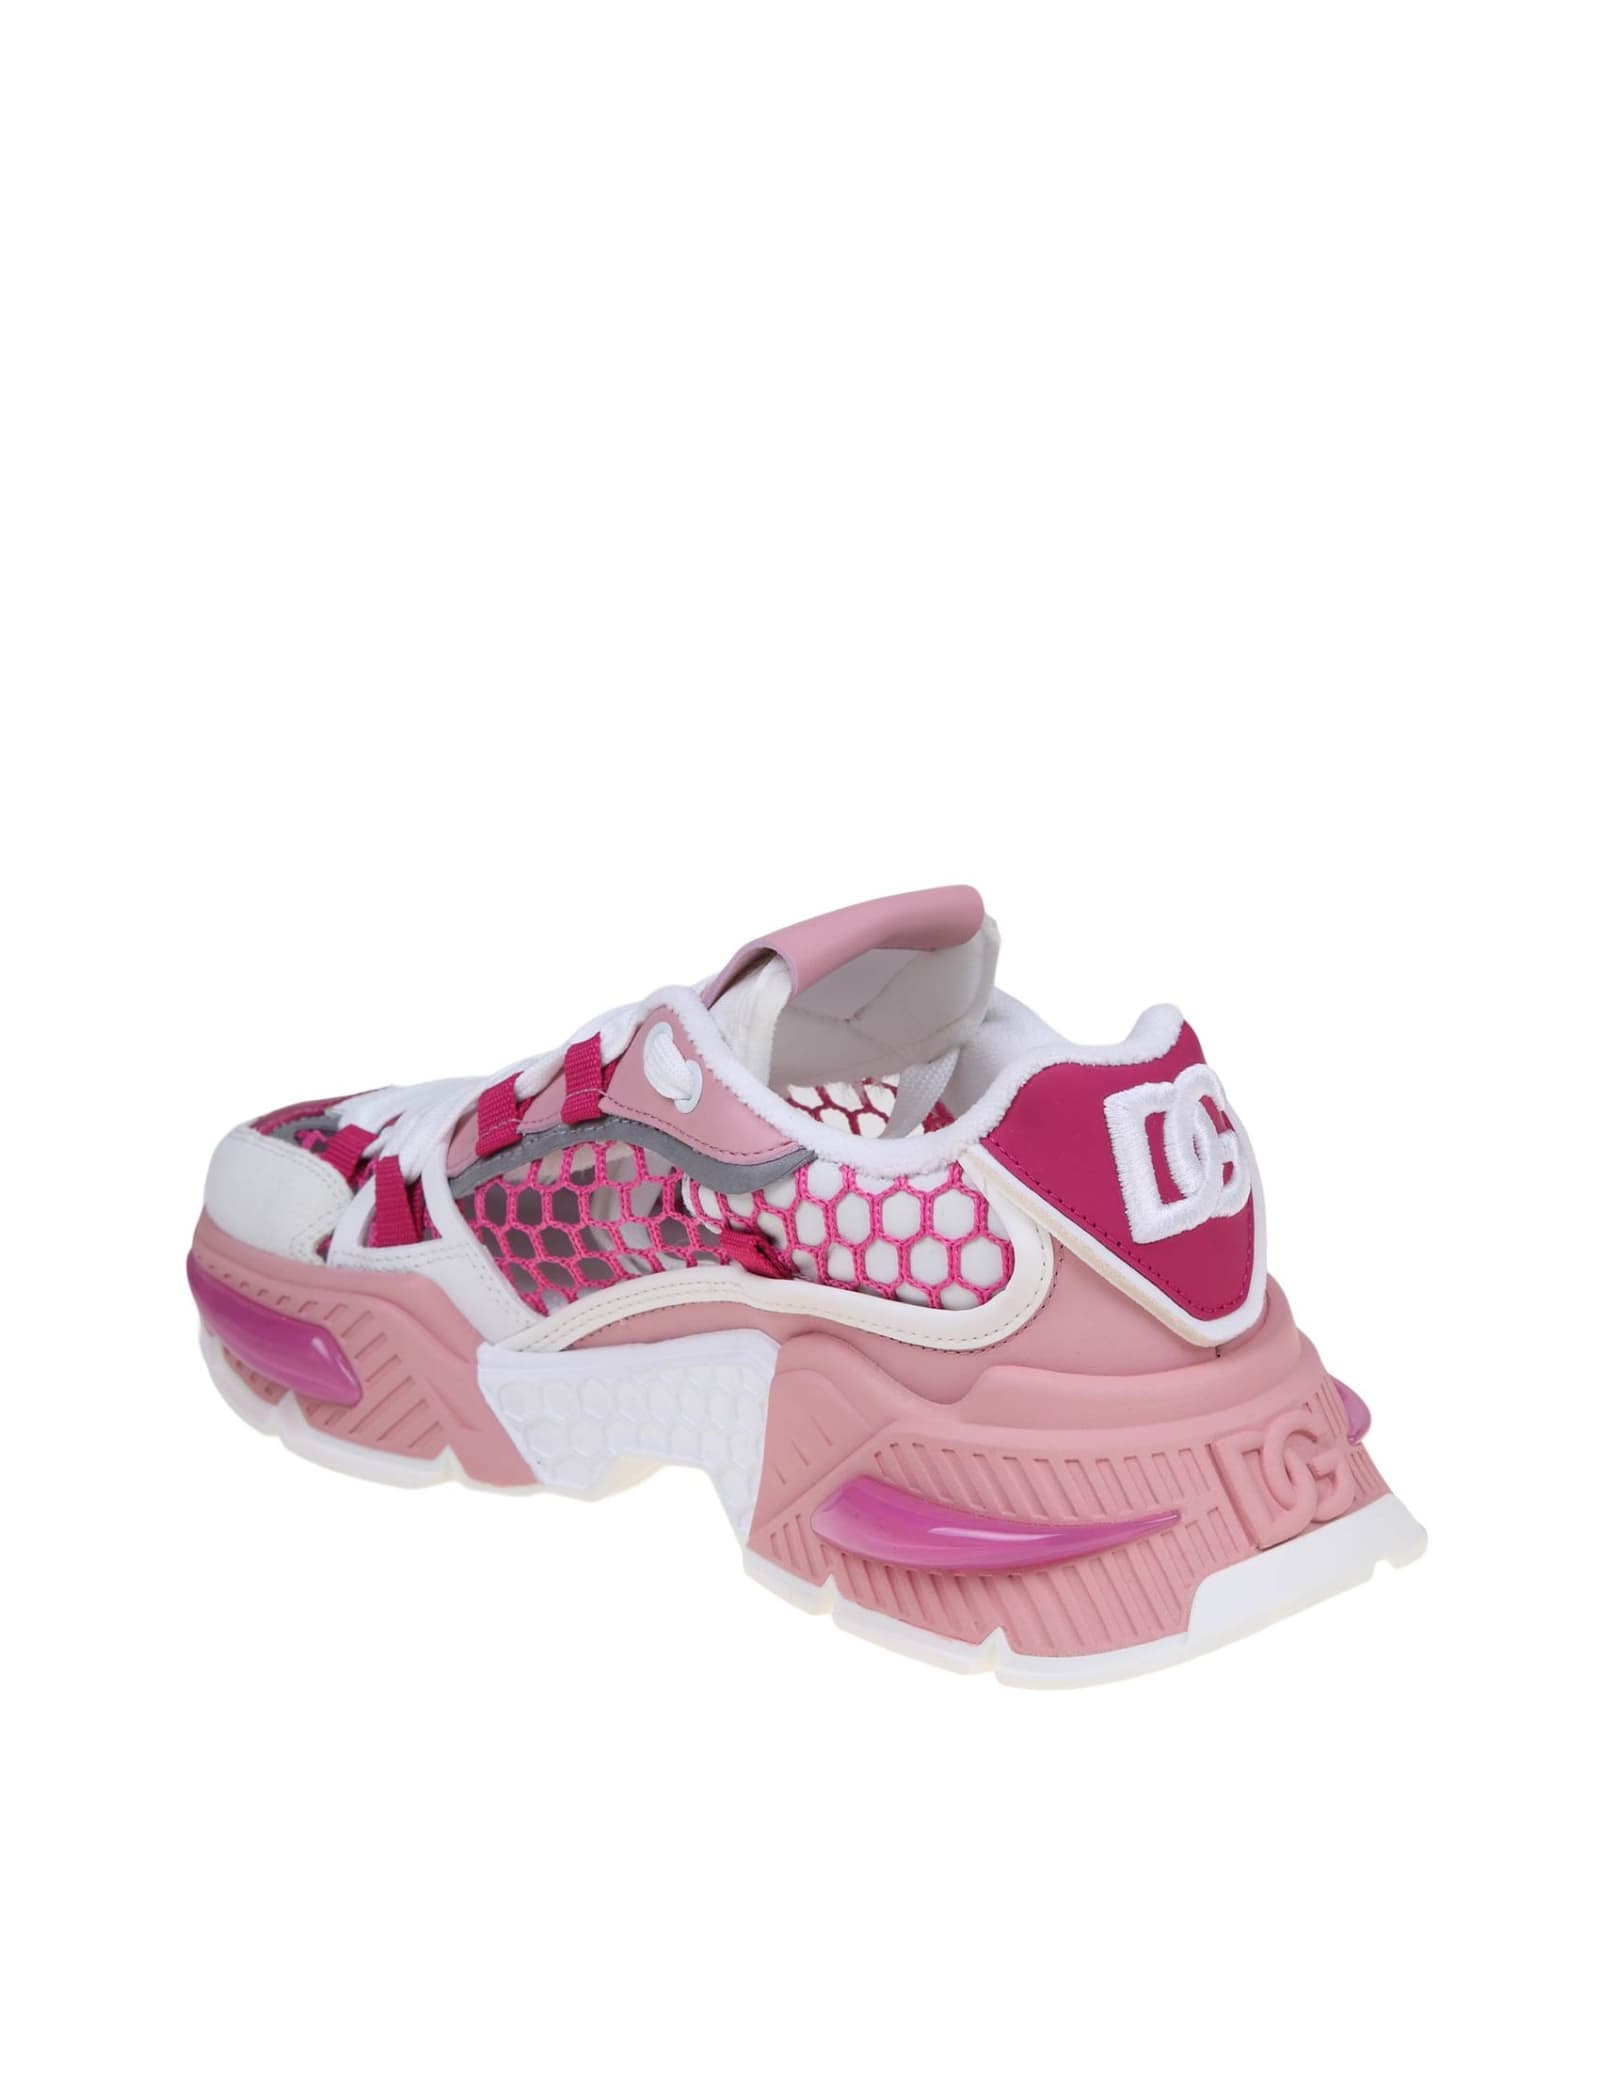 Shop Dolce & Gabbana Airmaster Sneakers In Mix Of White And Pink Materials In White/pink